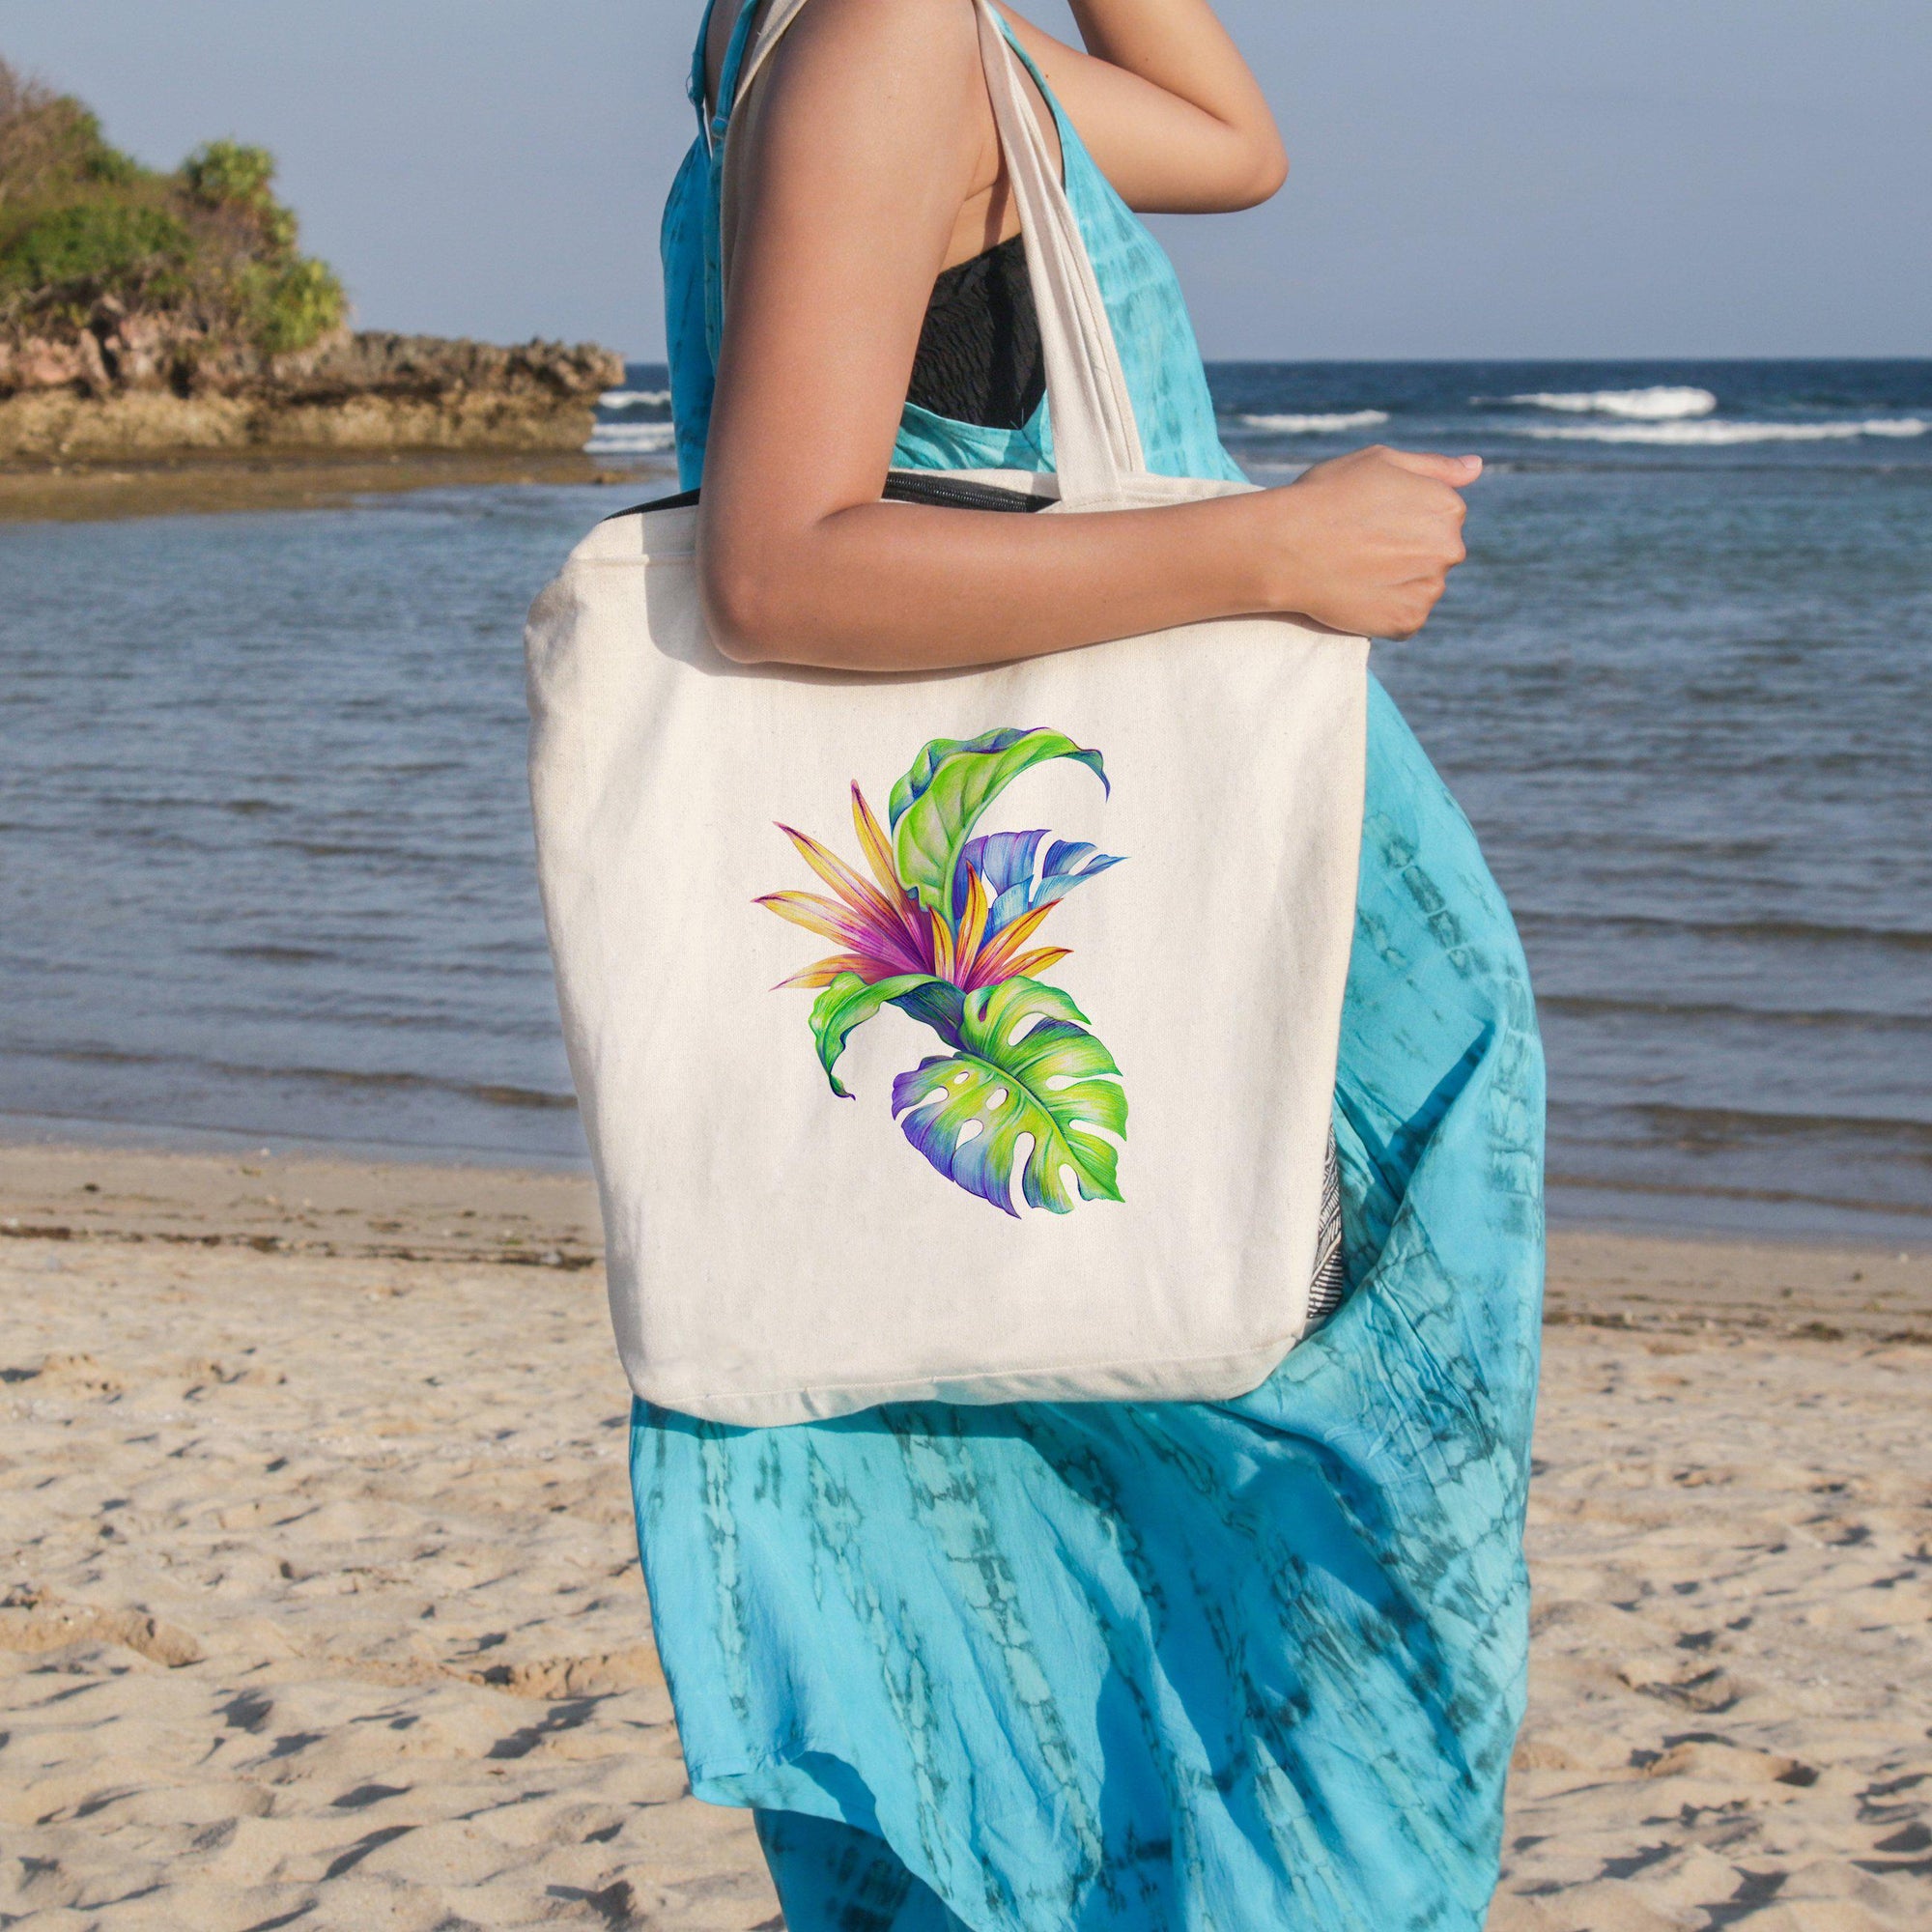 Blue Leaves' Hand-Painted Tote Bag